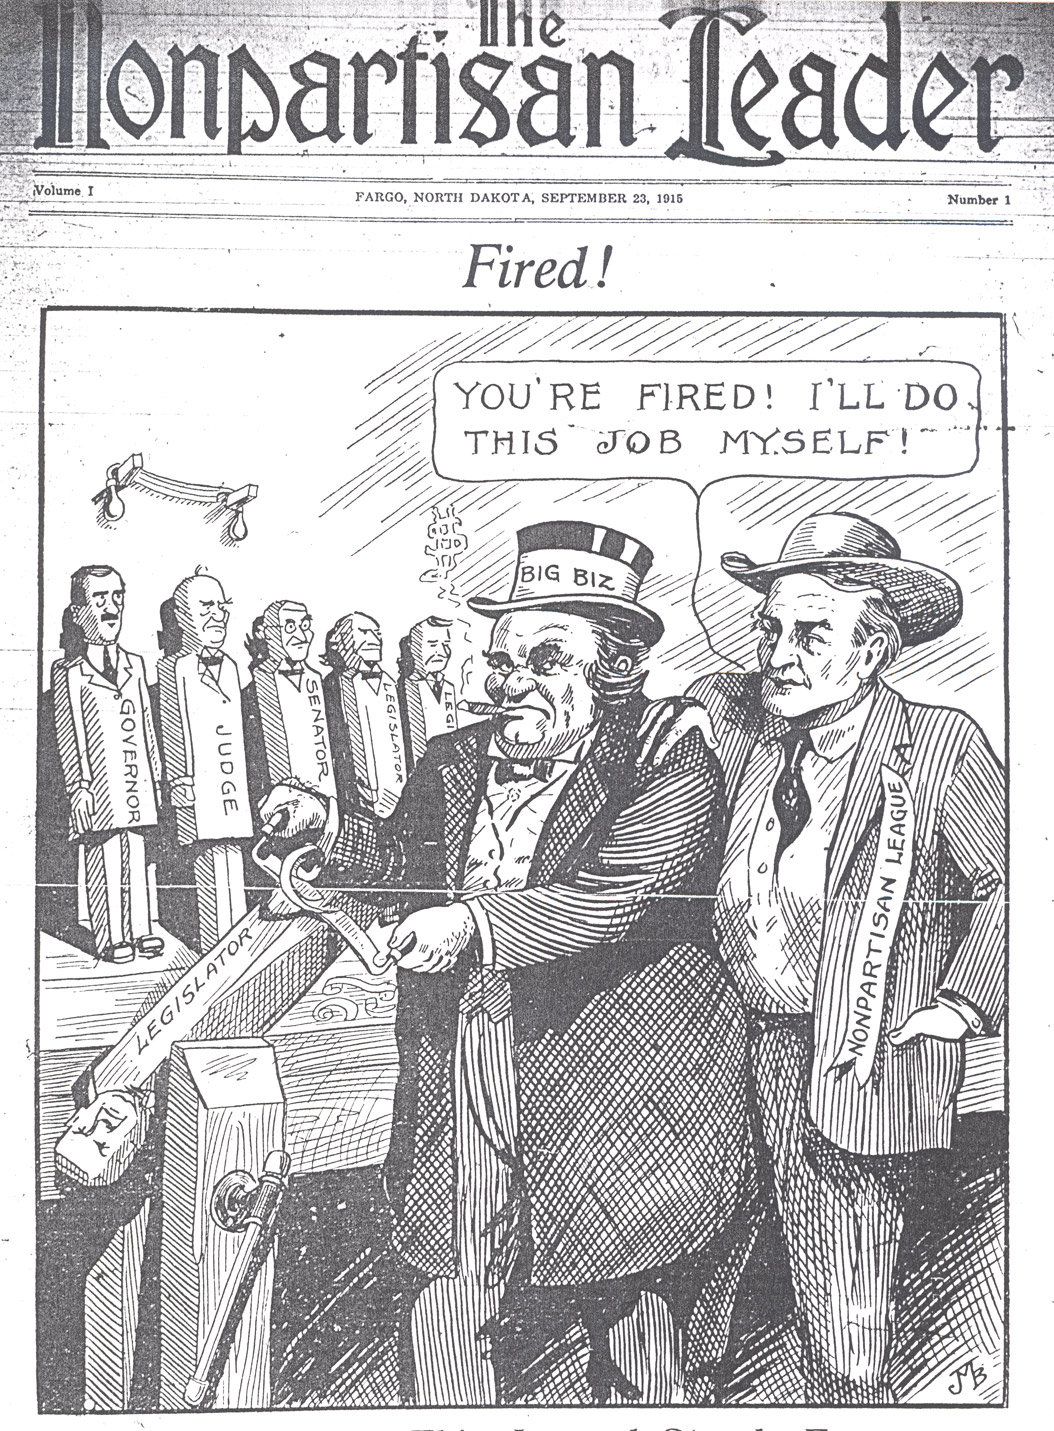 John M. Baer’s illustrated character from the first issue of the Nonpartisan Leader